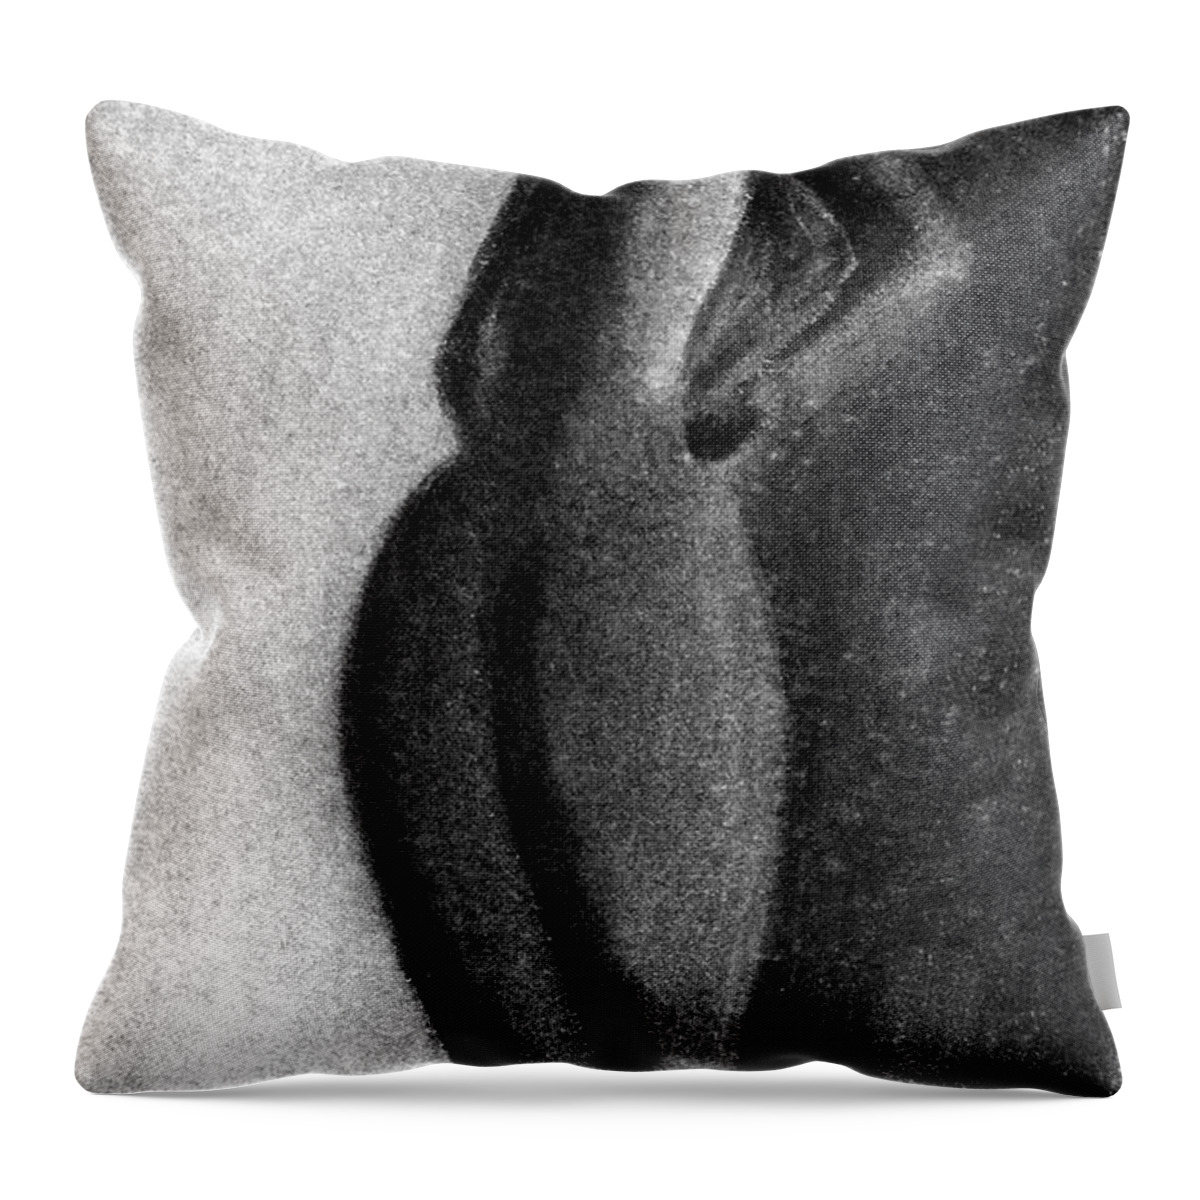  Throw Pillow featuring the drawing . by James Lanigan Thompson MFA